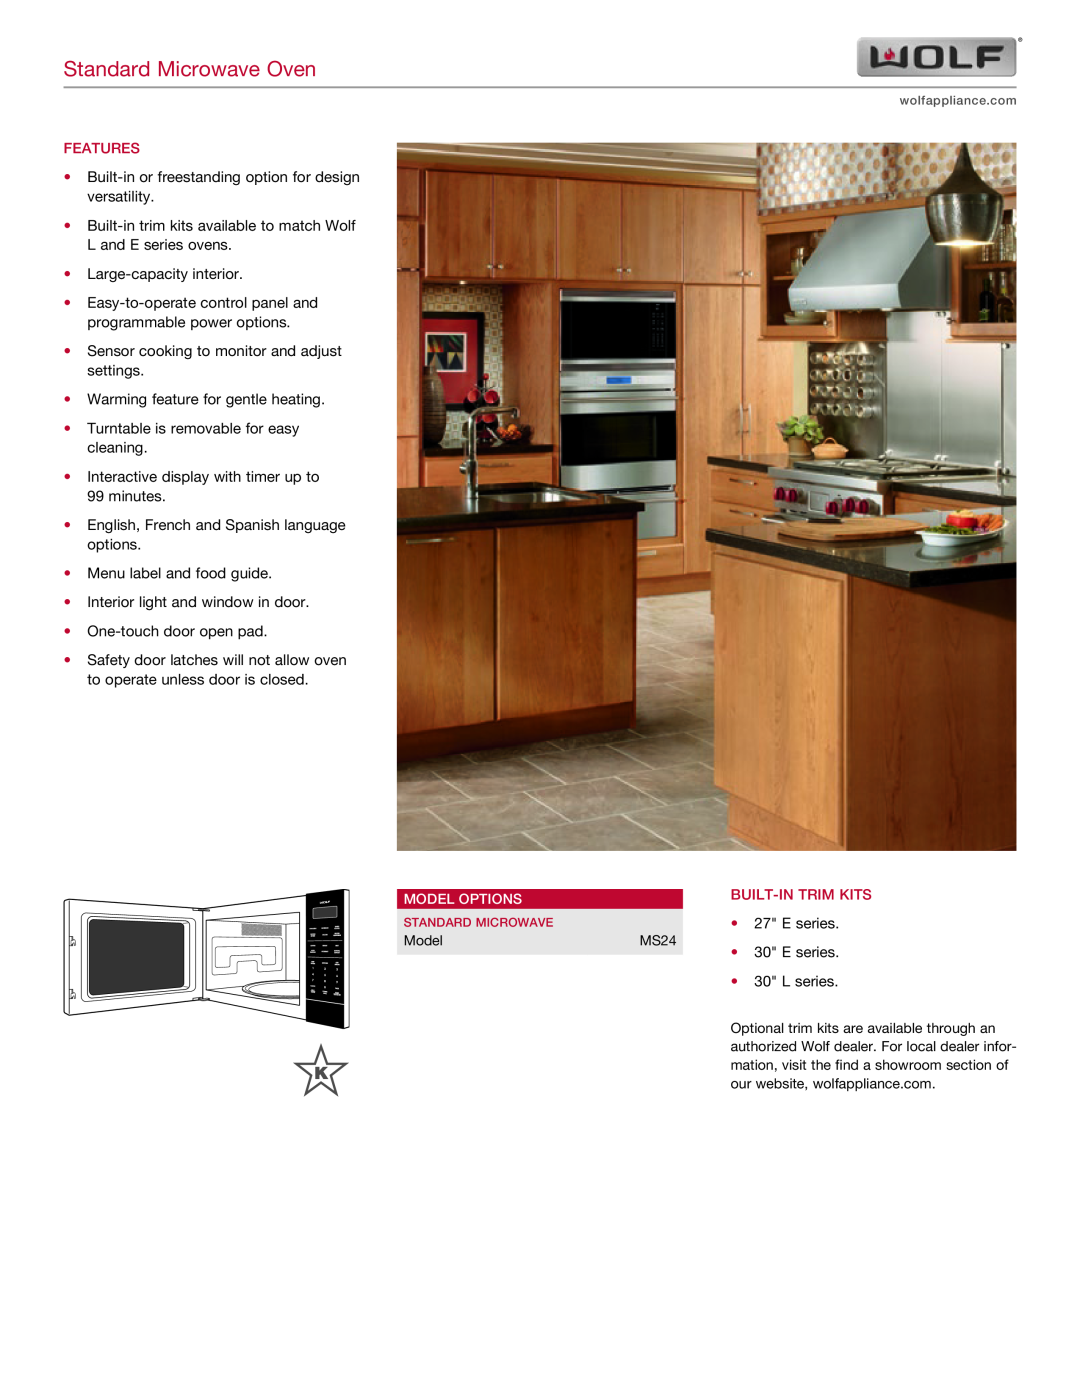 Wolf 30" E SERIES manual Standard Microwave Oven, Features, Built-In Trim Kits, Model Options, E series, MS24, L series 